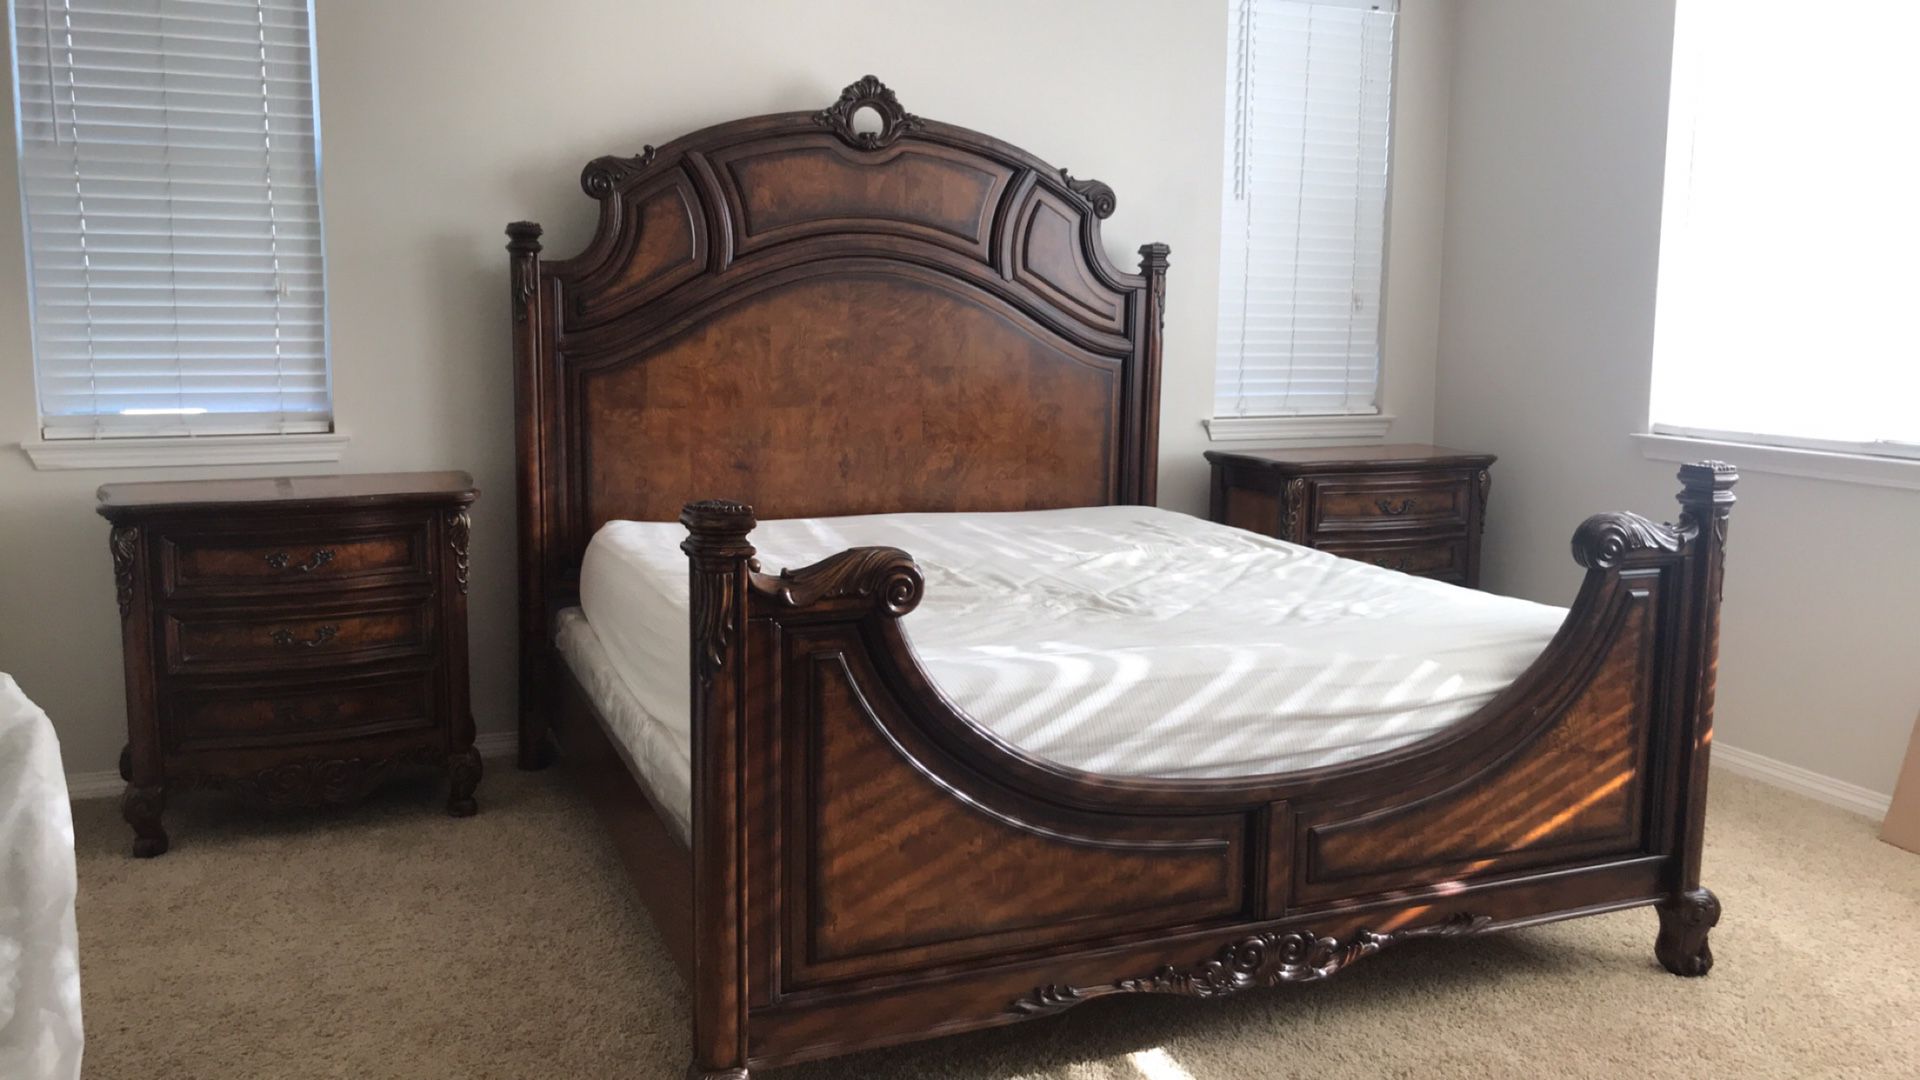 California King bed-frame and two nightstands (no mattress)